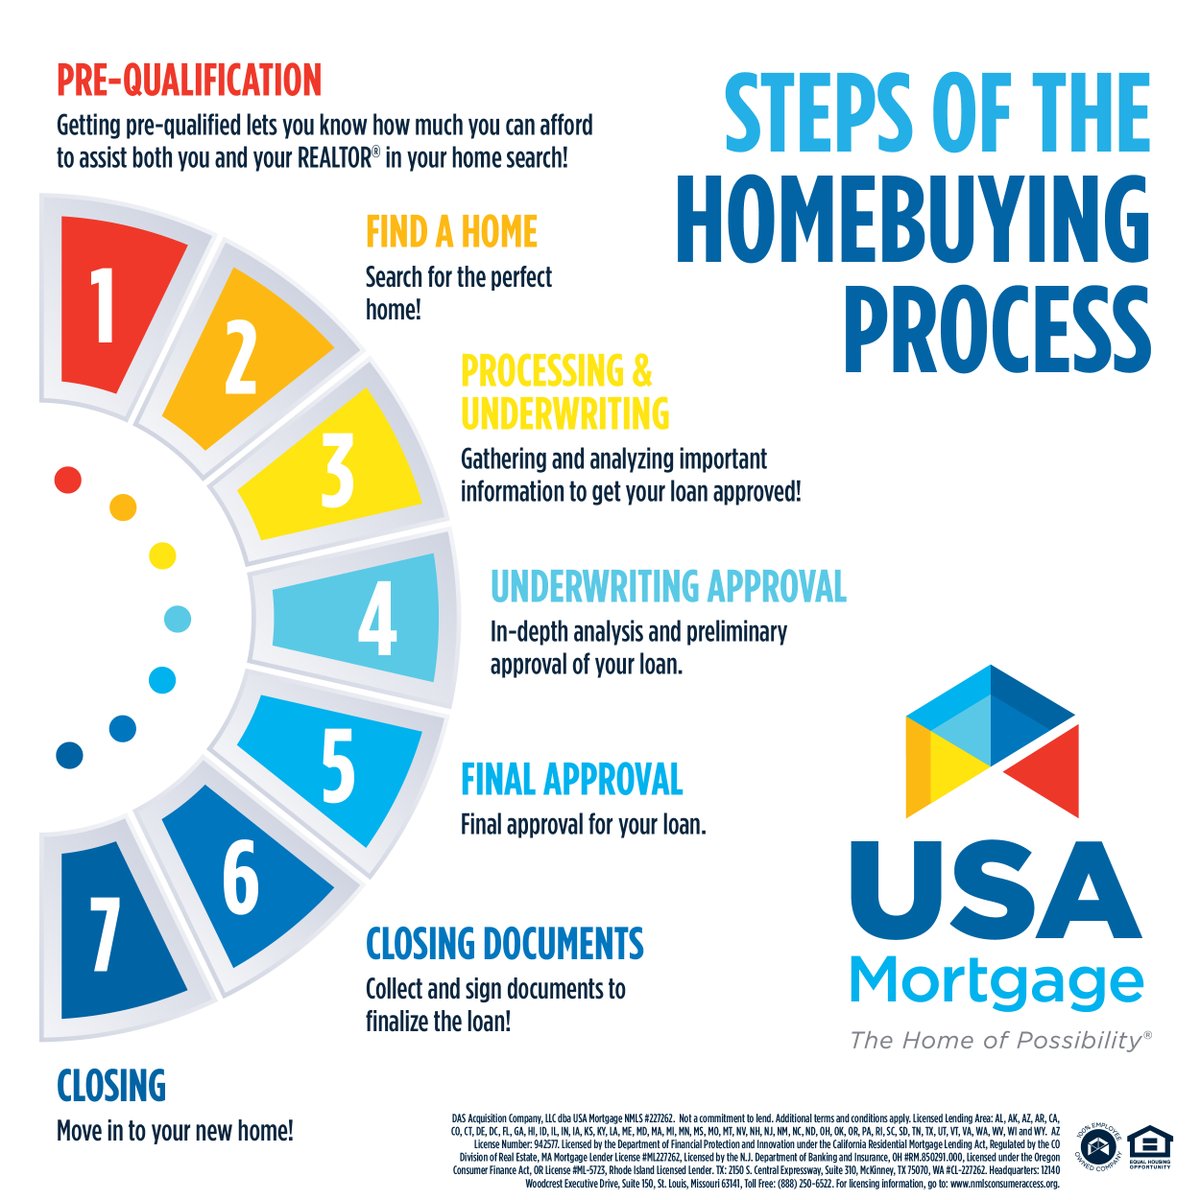 The loan process is a lot SIMPLER than most people realize! And at USA Mortgage, incredibly easy to get started. 

Message sbrown@usa-mortgage.com to be on your way to owning a new home before you know it! 🔑🏠 

#USAMortgage #HomeOfPossibility #LocalLender